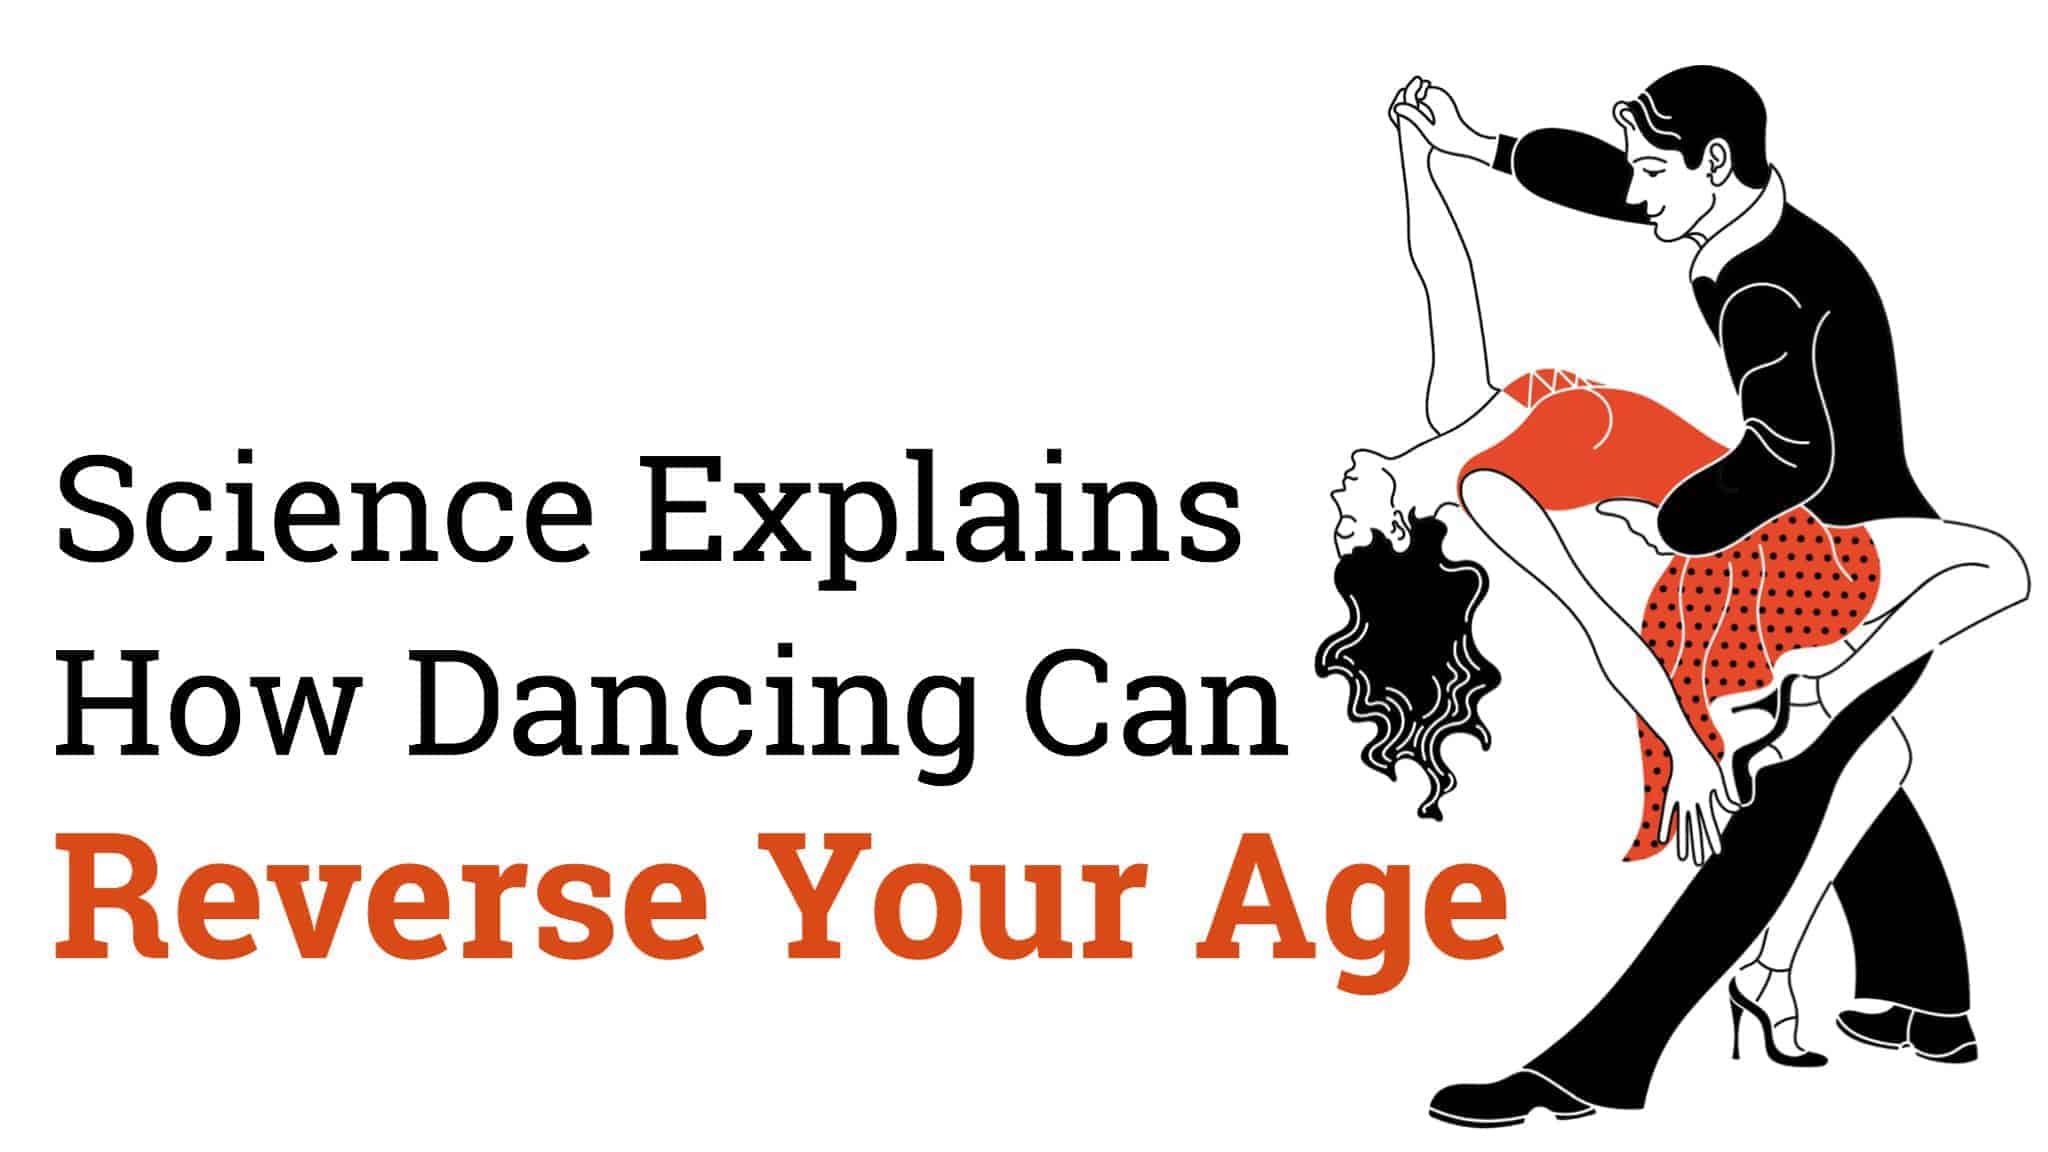 Science Explains How Dancing Can Reverse Your Age